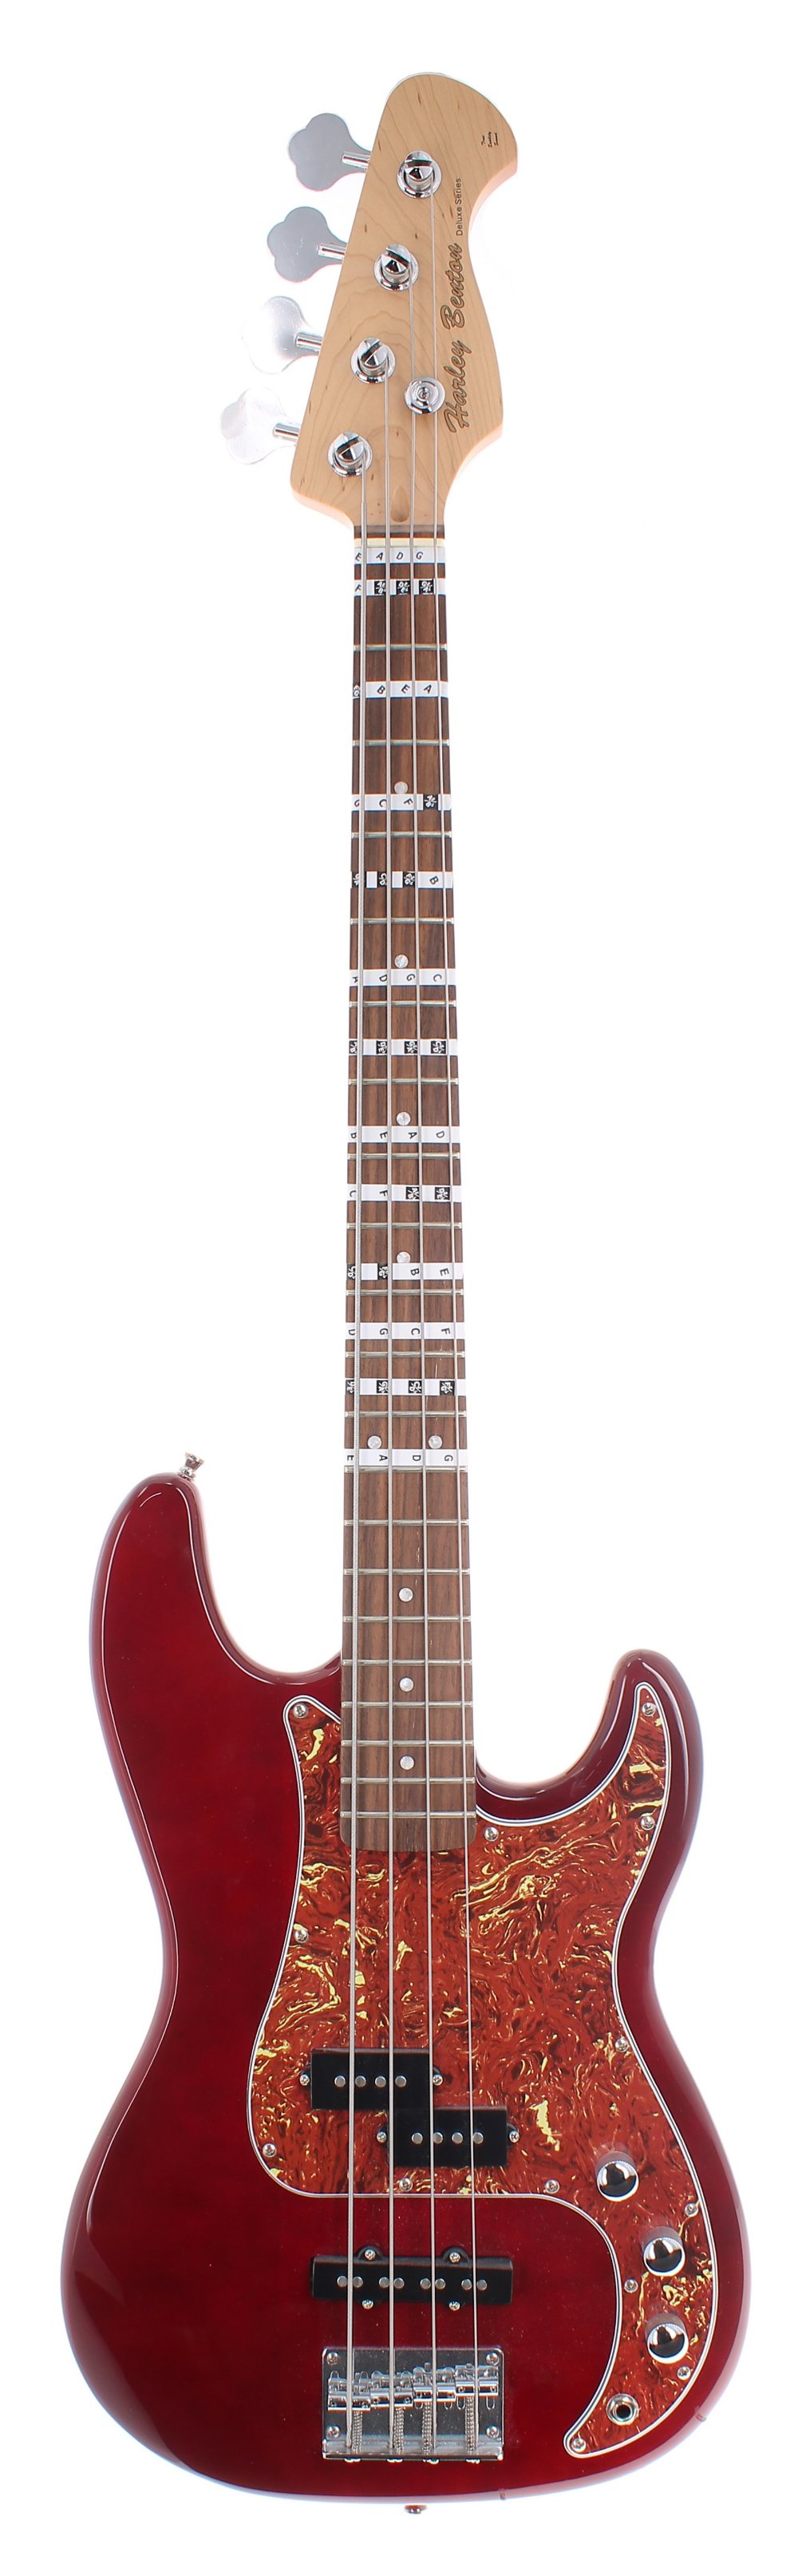 Harley Benton Deluxe Series bass guitar; Finish: red; Fretboard: rosewood, notation guide stickers